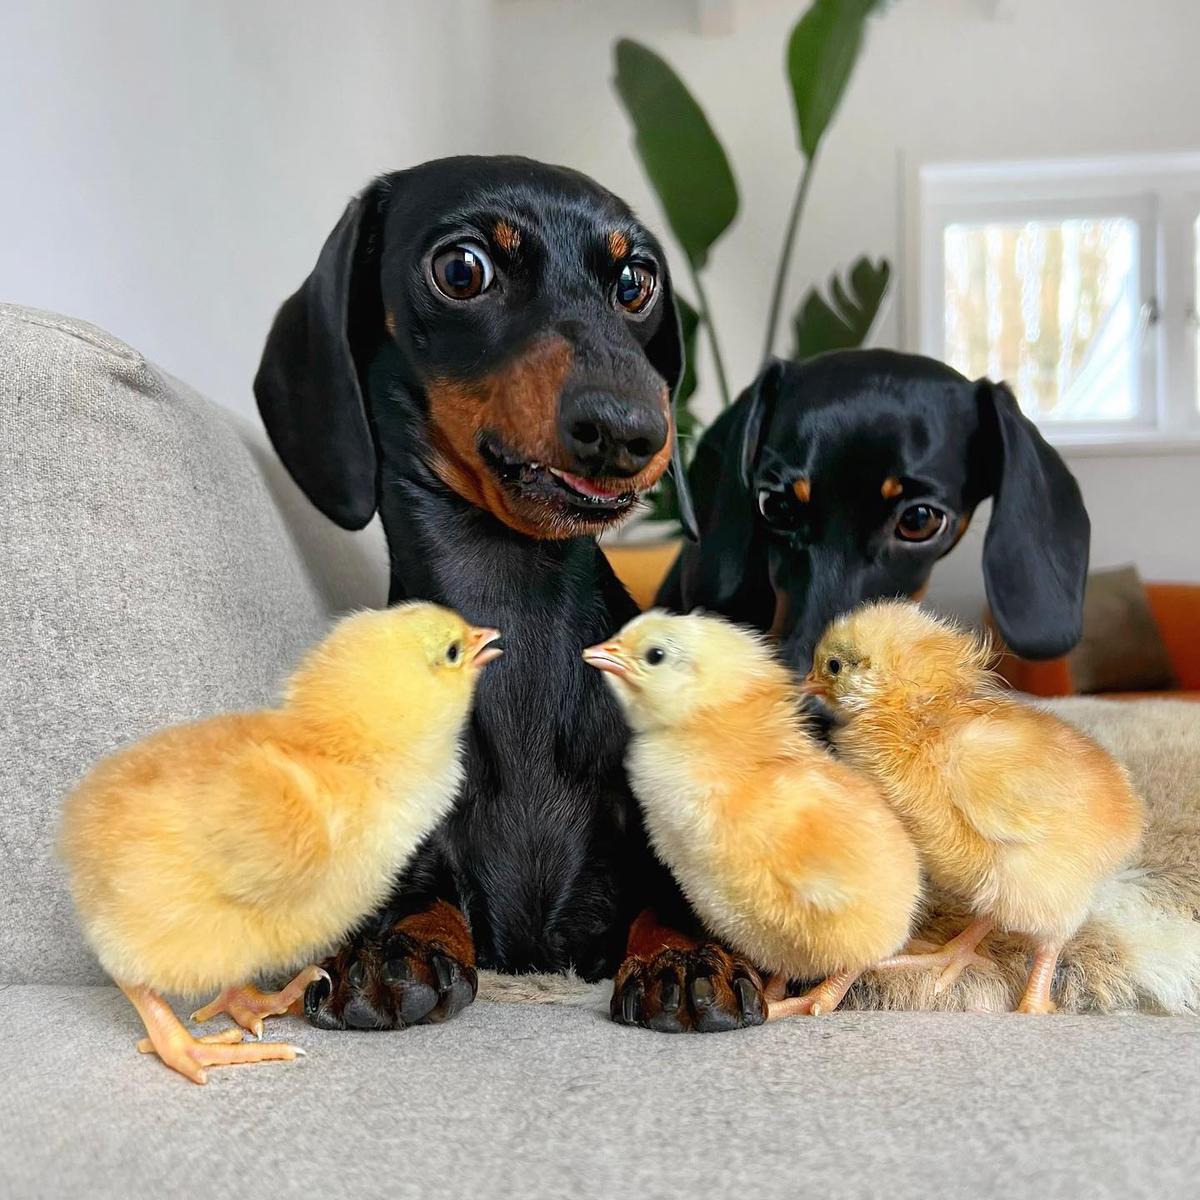 Loulou (front) and Coco (back) with the chicks. (Courtesy of Eveline Smith via <a href="https://www.instagram.com/loulouminidachshund/">Loulou & Coco</a>)